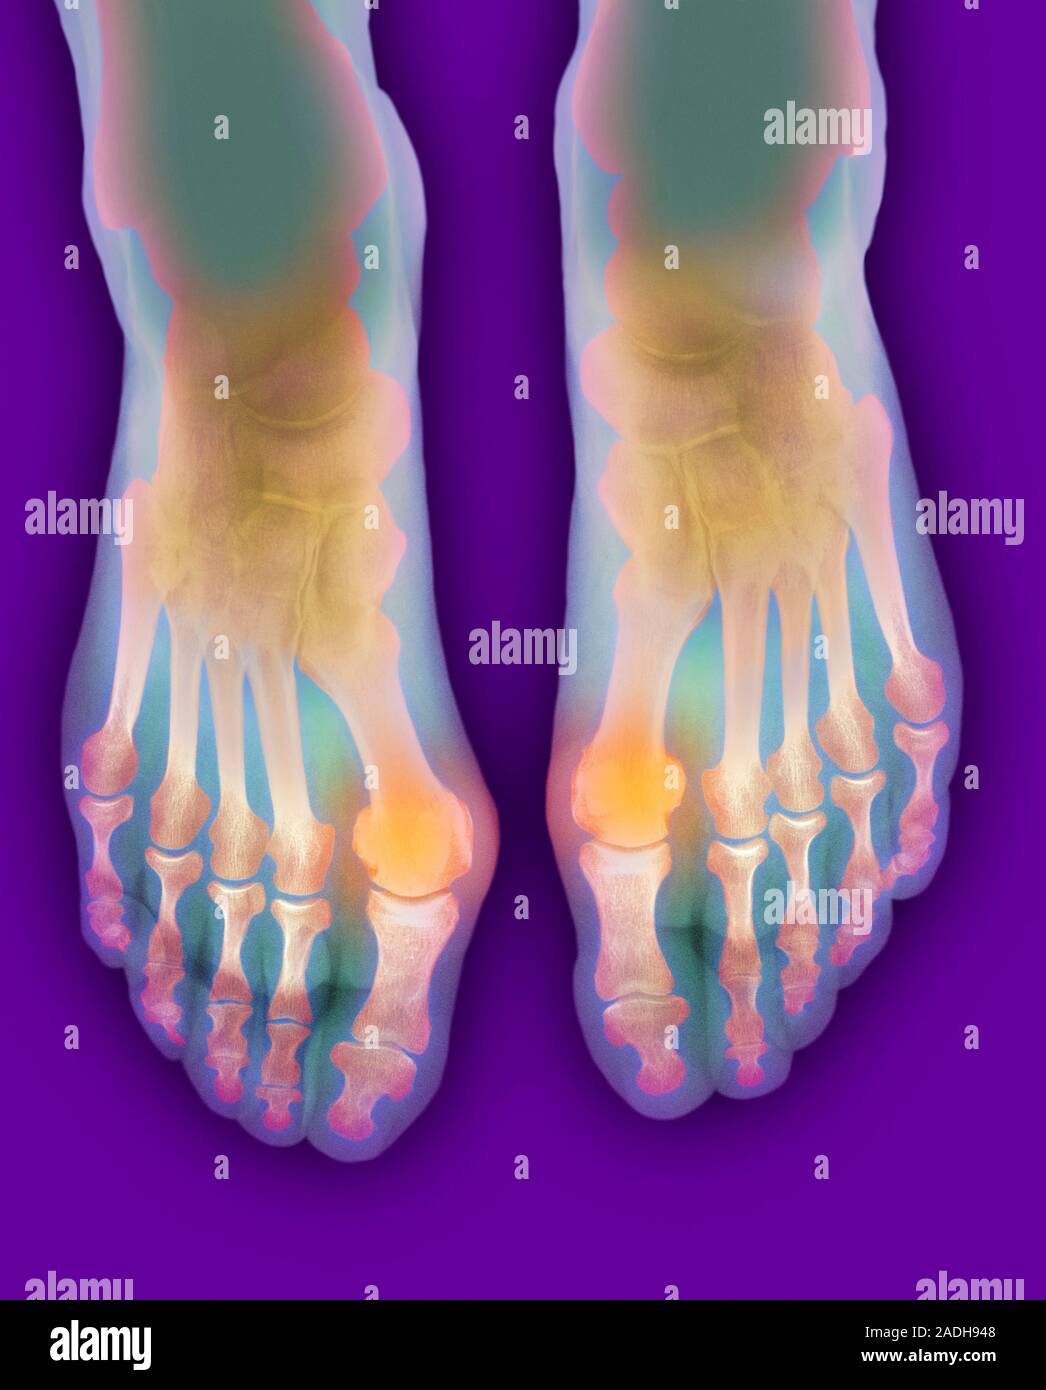 Bunions Coloured X Ray Of An Elderly Woman S Deformed Inward Turning Toes Due To Bunions